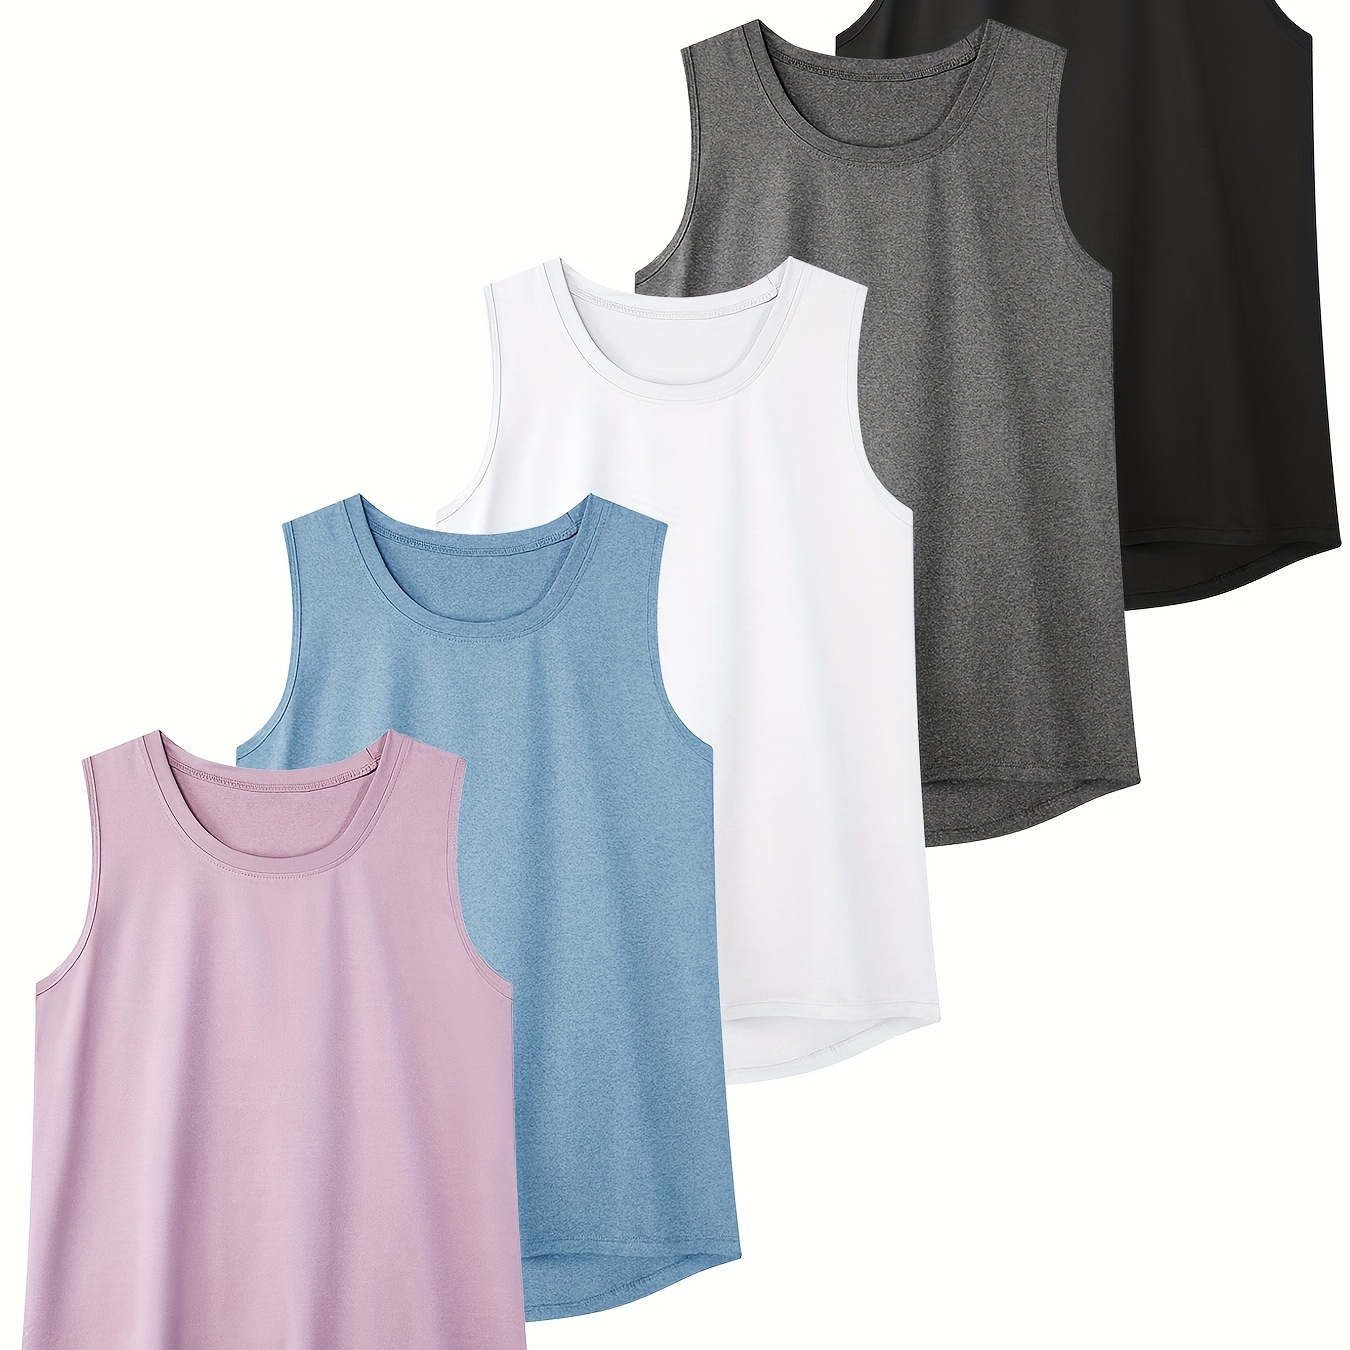 

5-pack Women's Athletic Tank Tops, Quick-dry Breathable Sleeveless Shirts, Full Back Running Gym Vest Top, Sportswear - Assorted Colors